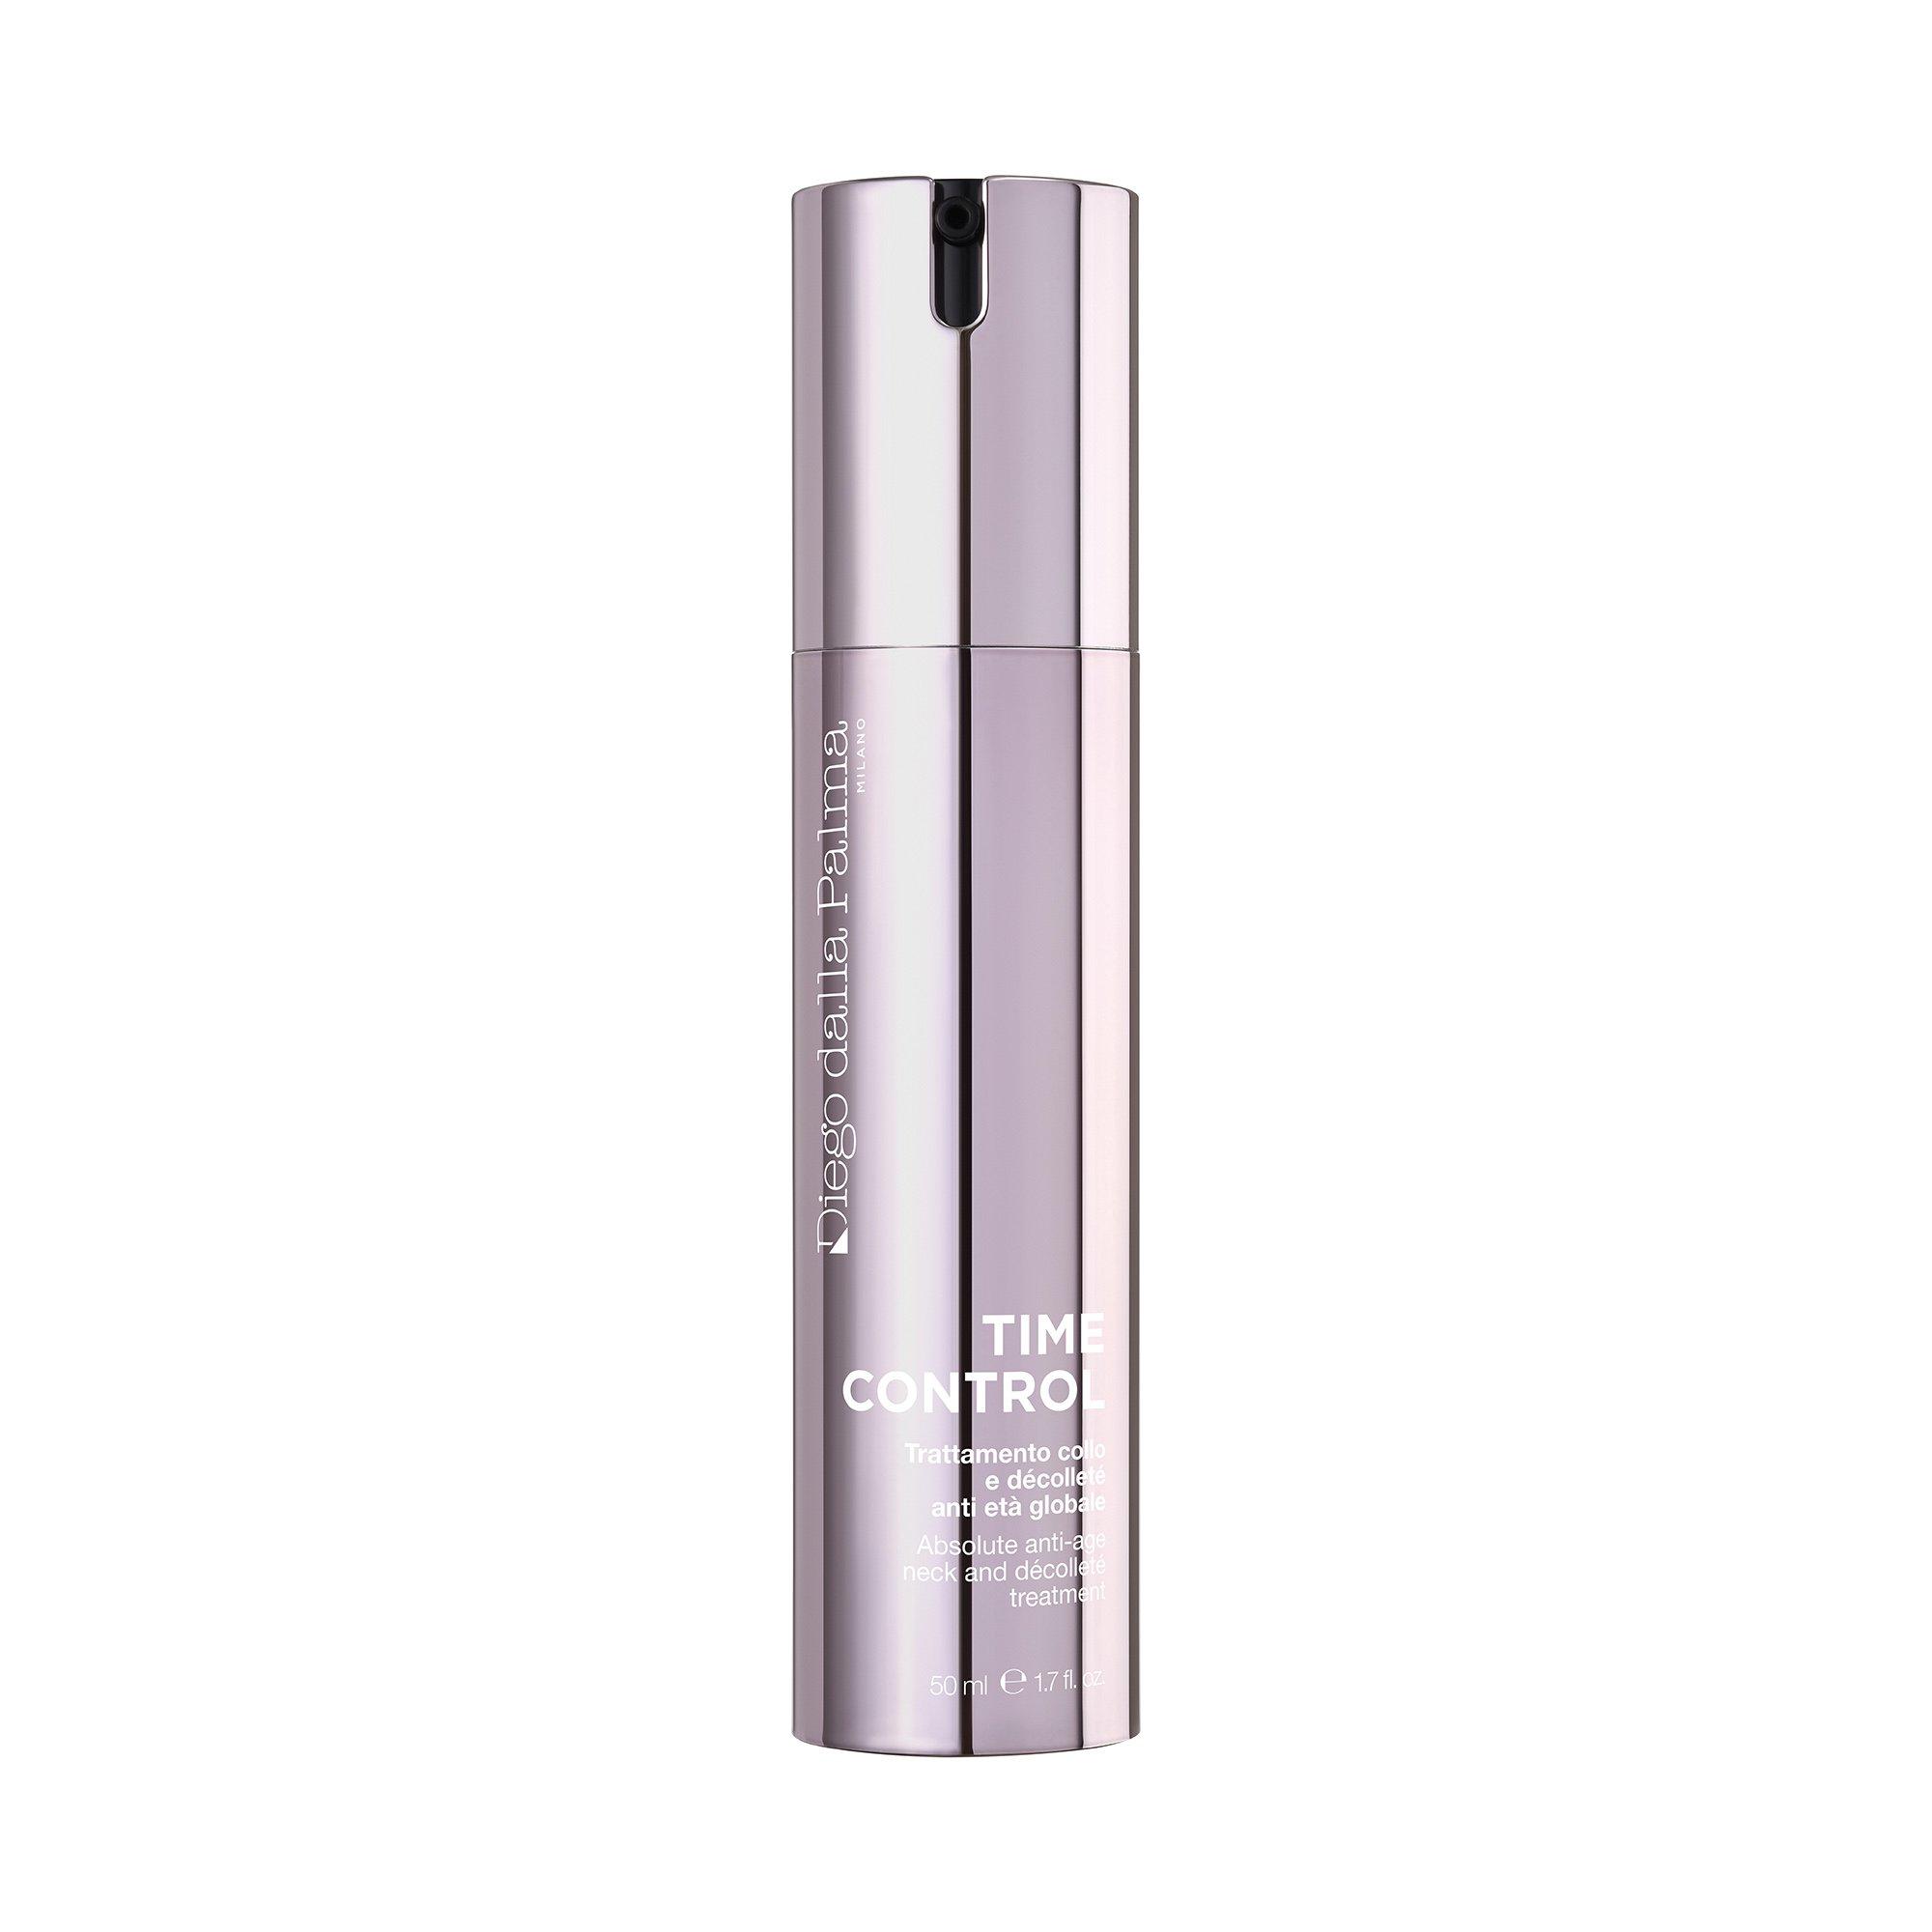 Image of diego dalla palma Time Control Global Anti-Age Neck and Décolleté Treatment - 50ml